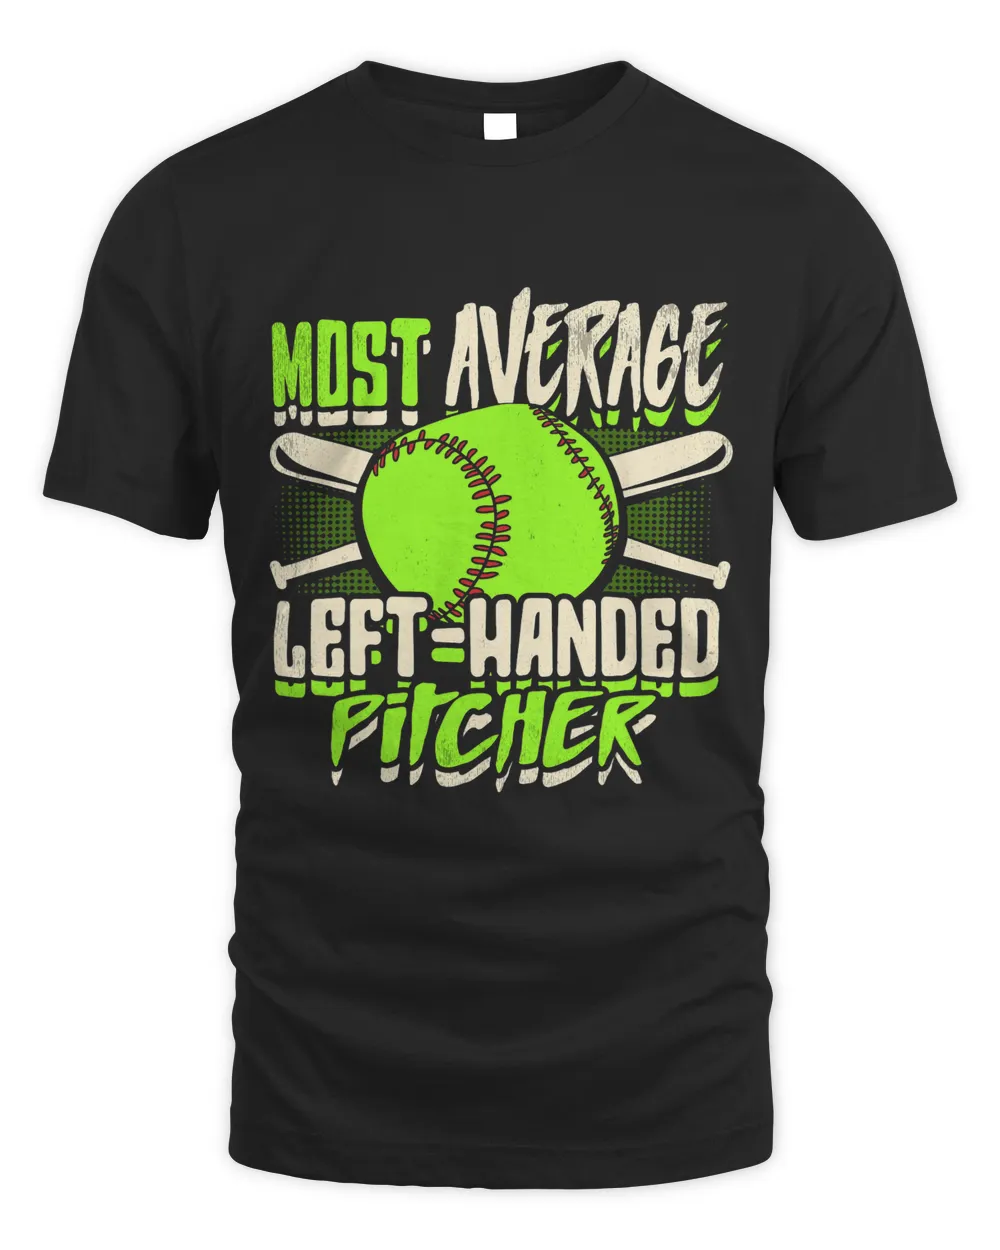 Funny Most Average LeftHanded Pitcher Softball Player